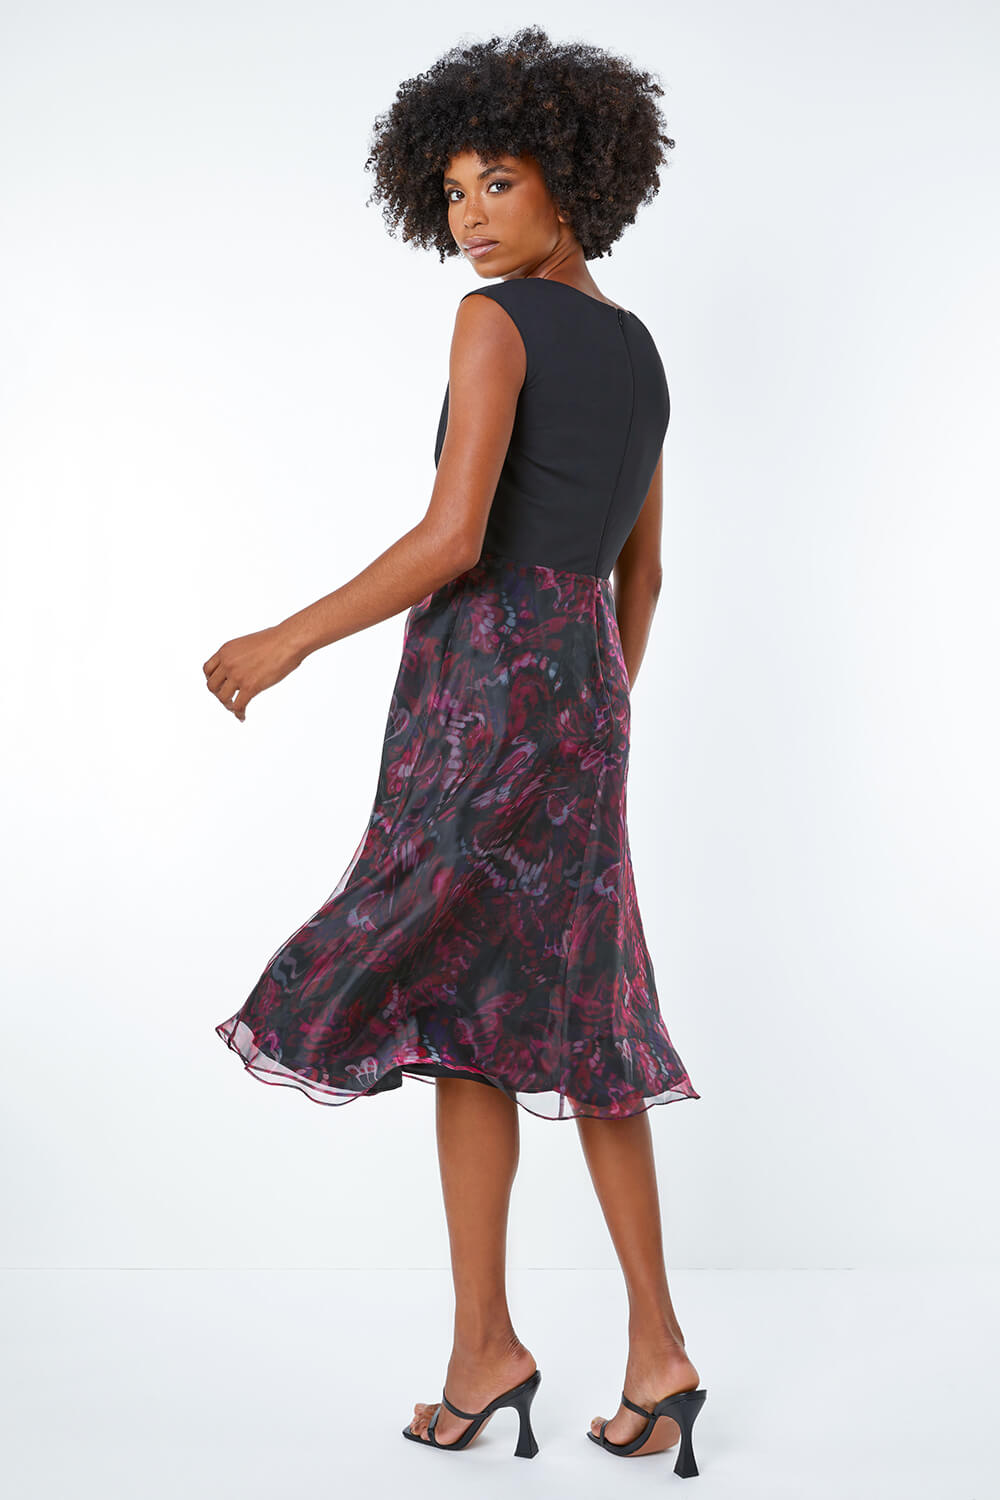 PINK Twist Front Butterfly Print Stretch Dress, Image 3 of 5